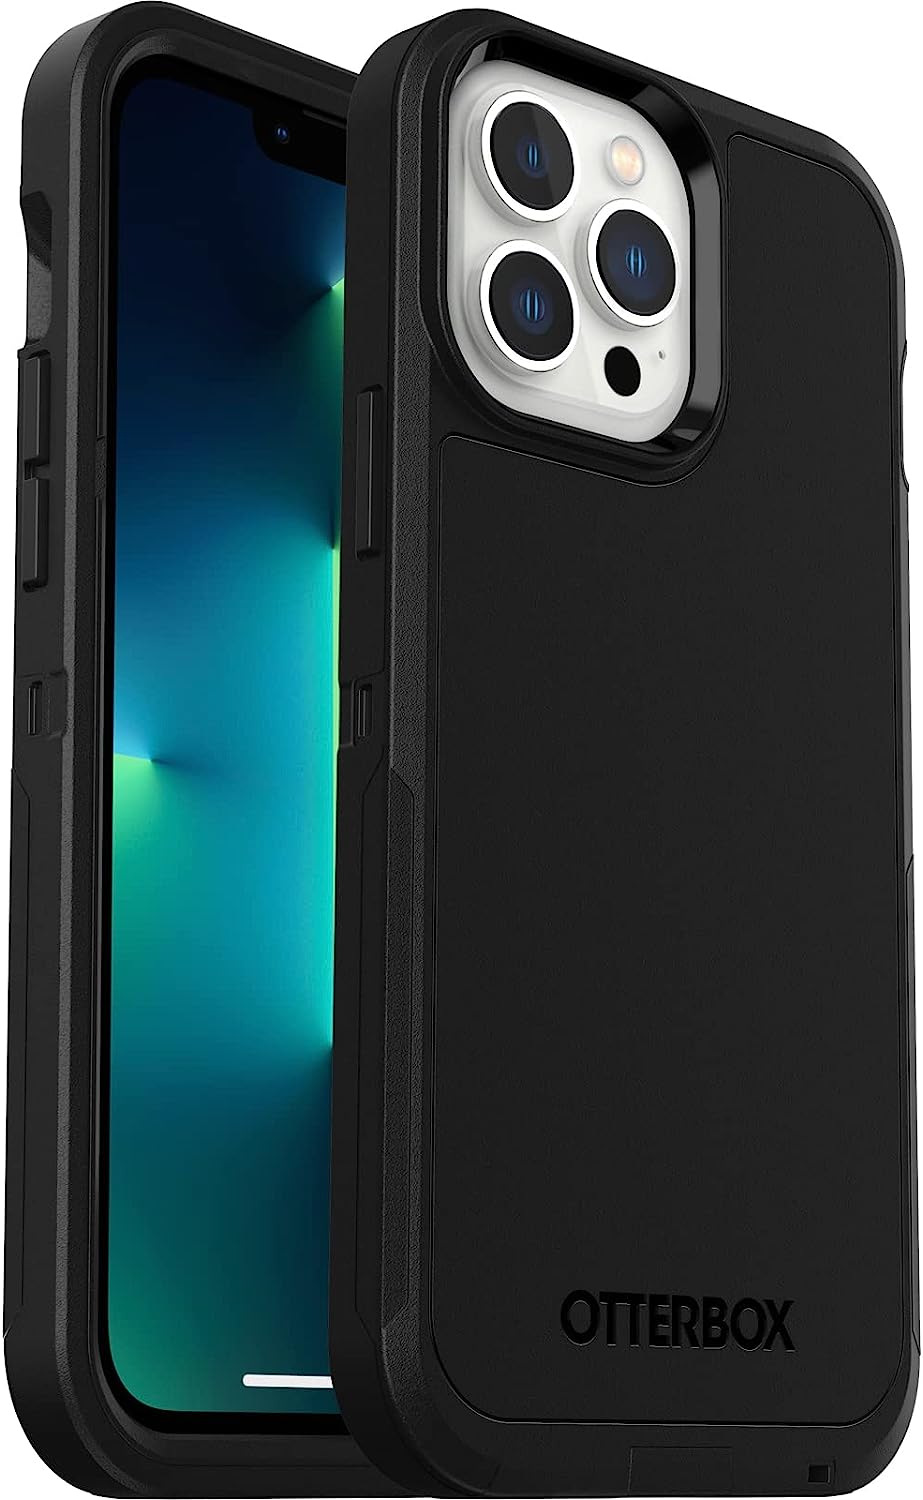 OtterBox DEFENDER SERIES XT Case w/MagSafe for Apple iPhone 13 Pro Max - Black (Certified Refurbished)